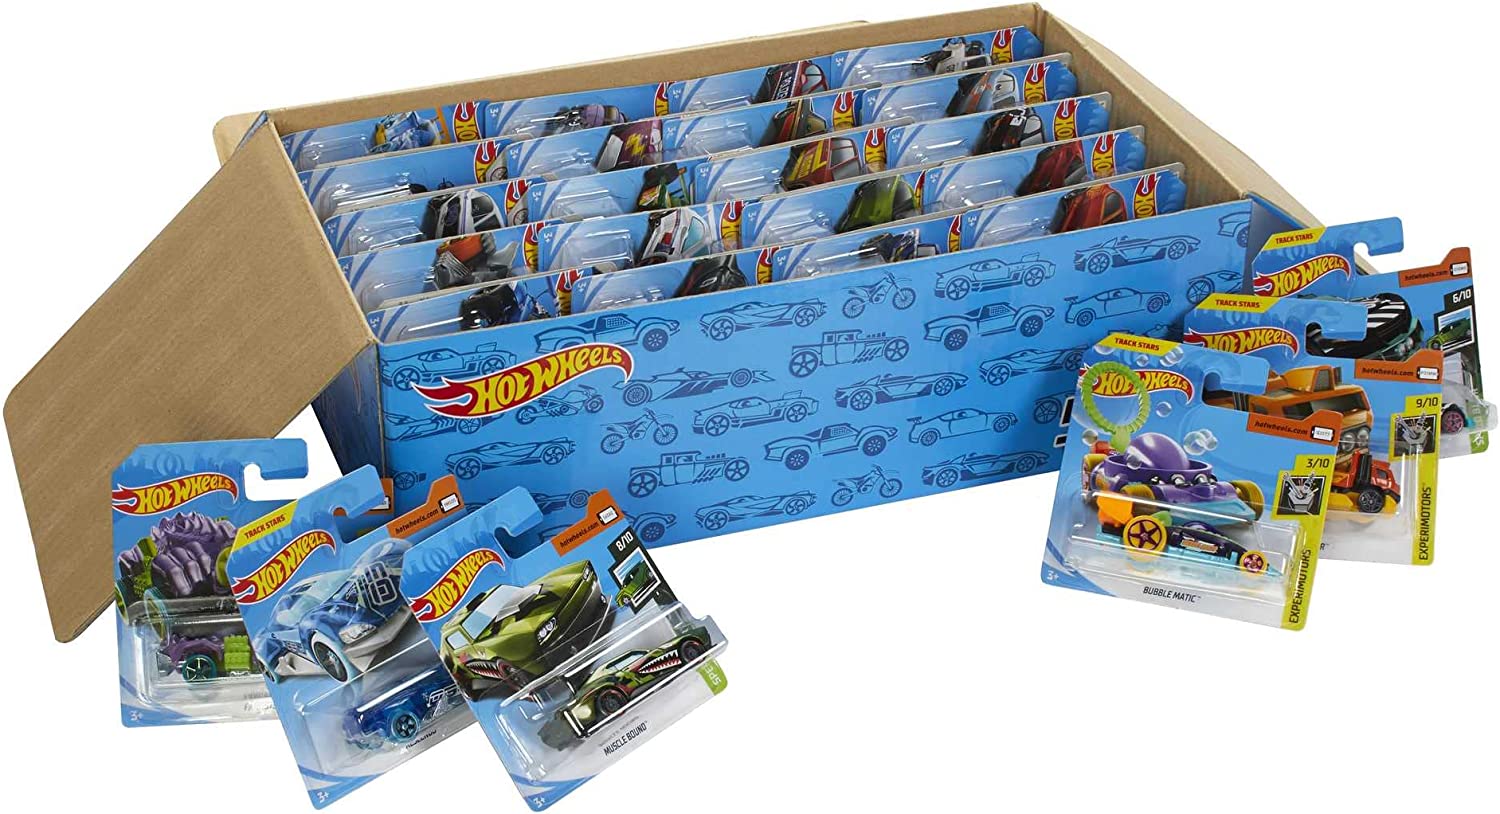 Hot Wheels 50-Car Pack, Styles May Vary - 1:64 Scale Vehicles Individually Packaged